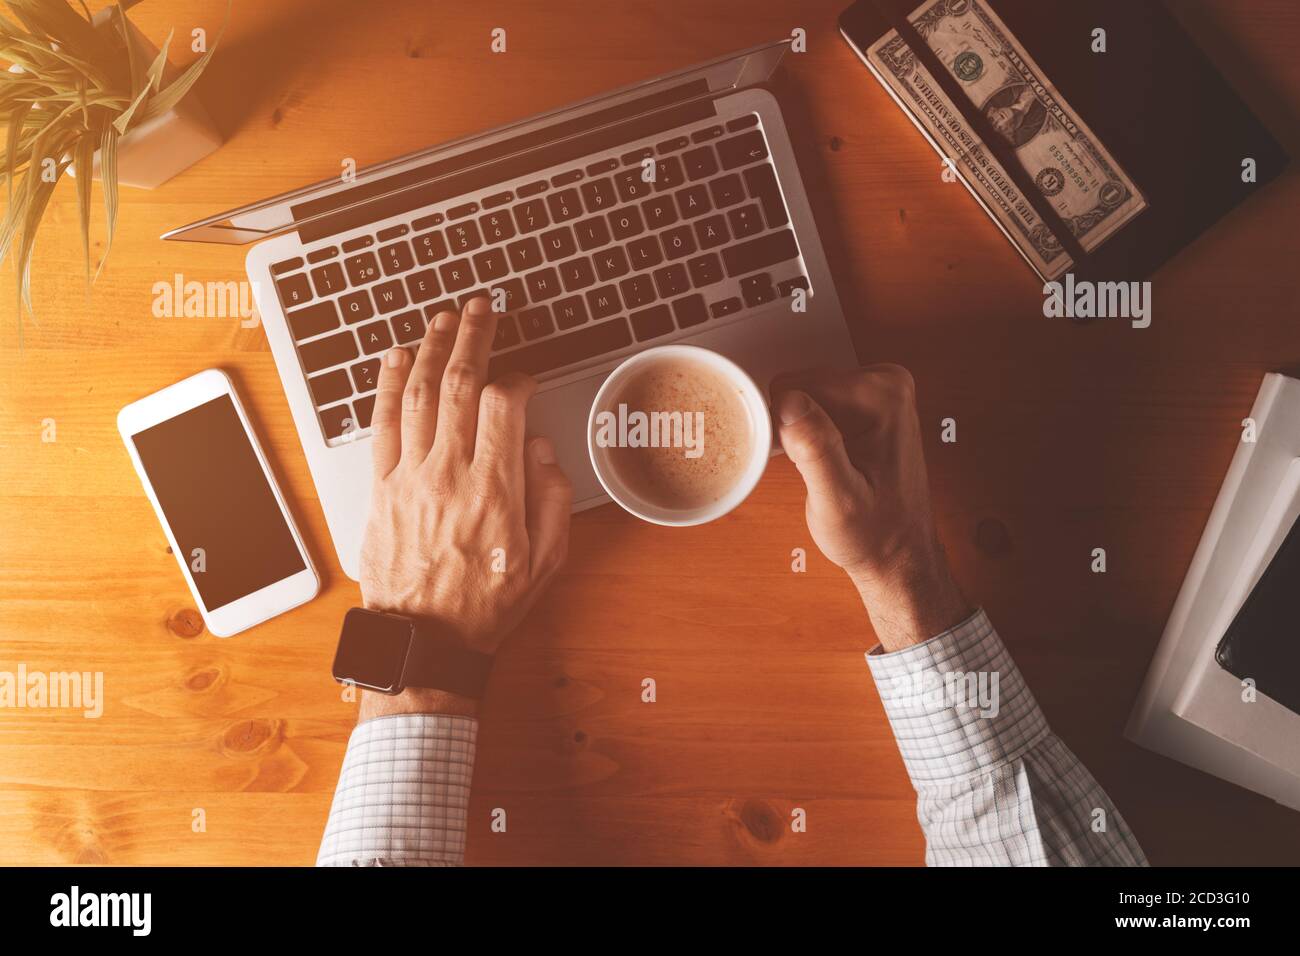 Businessman drinking coffee and typing laptop computer keyboard, overhead shot of office desk in morning Stock Photo